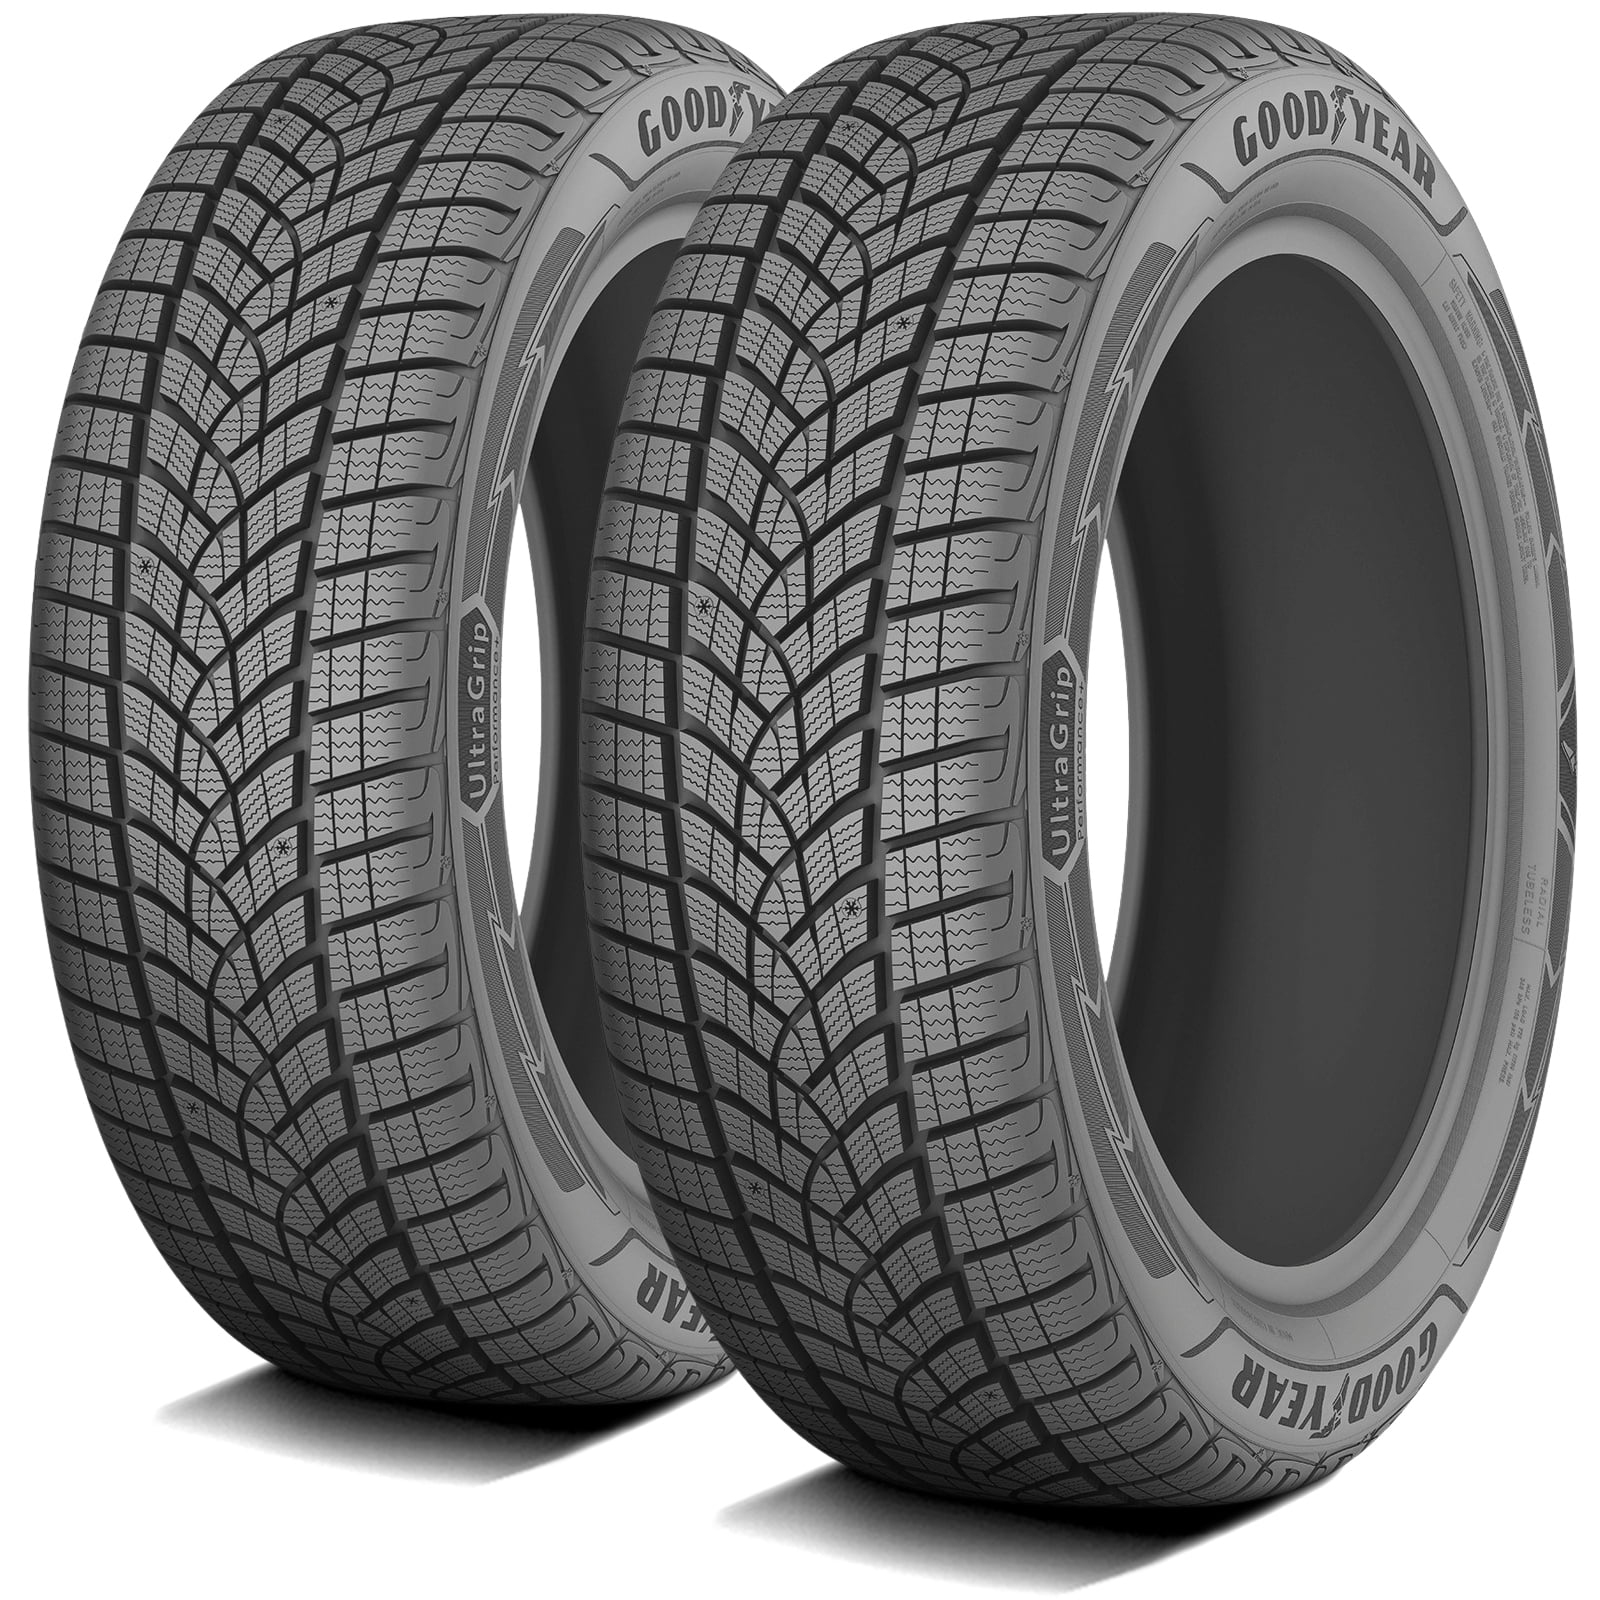 225/55R19 Escape Studless Grip Winter Grand 2020 Performance Tire CX-5 Goodyear Mazda 99V Plug-In Touring, SUV Ford Hybrid Ultra Fits: One 2013-16 + Titanium